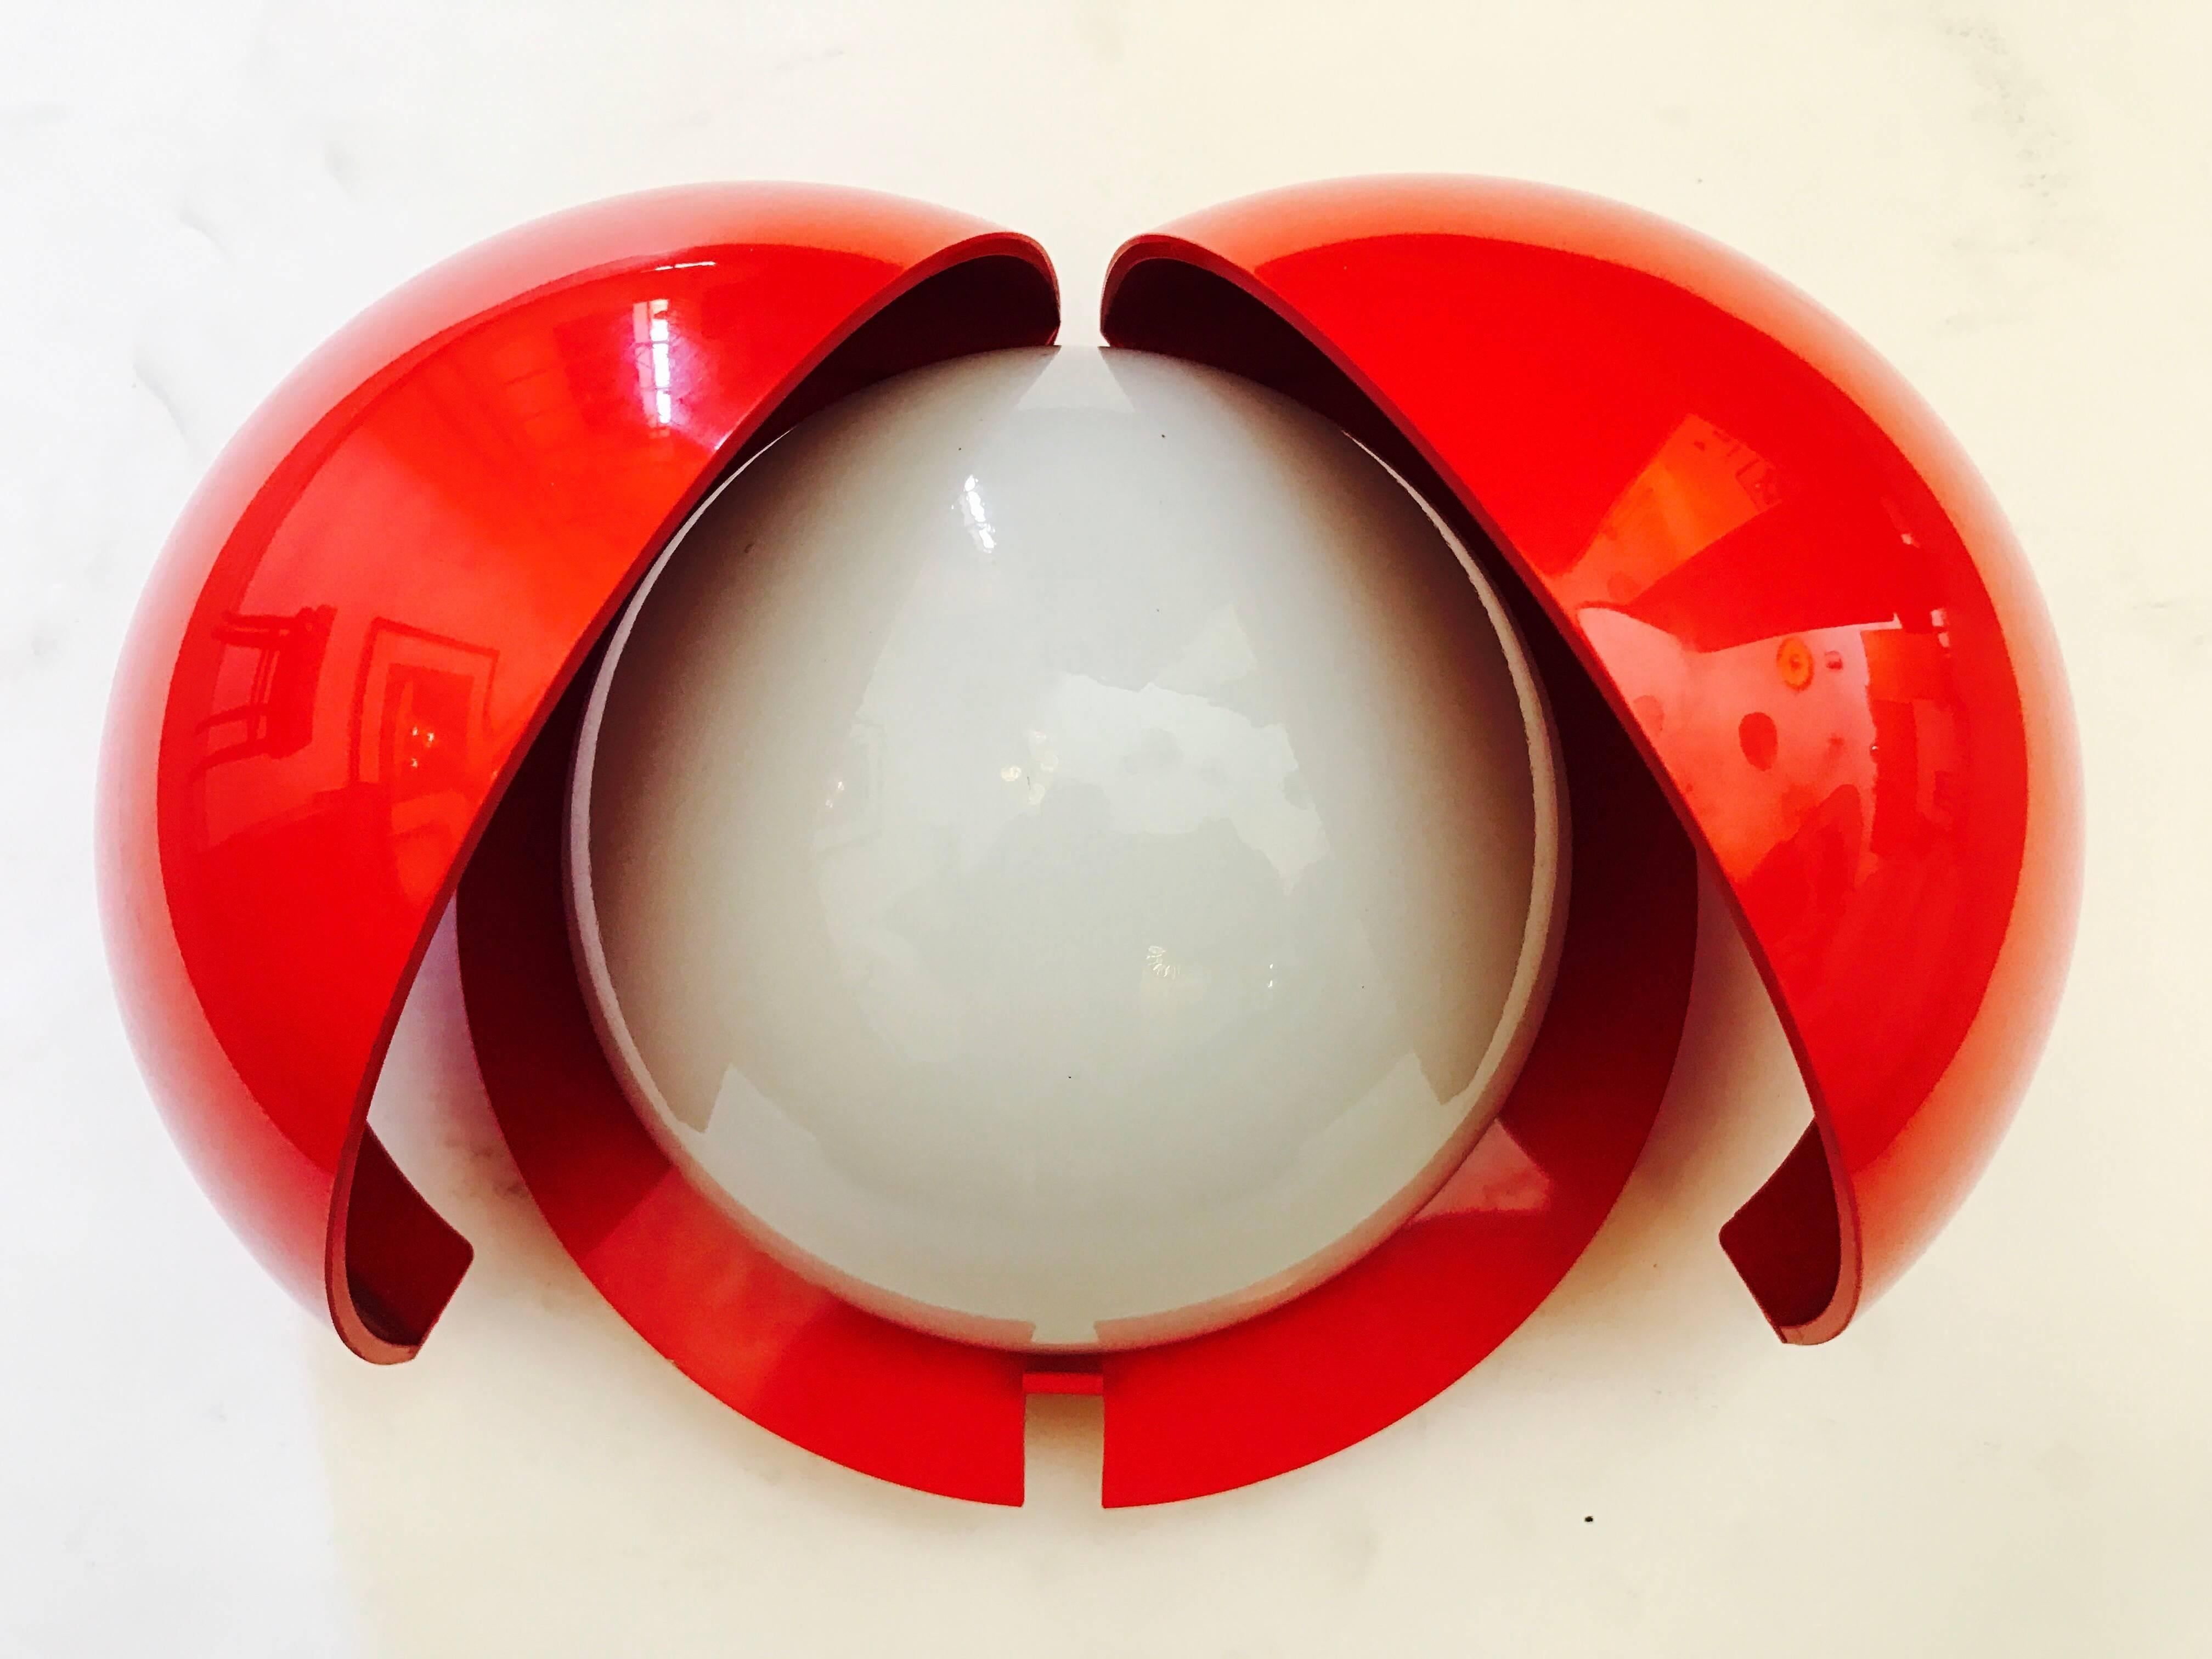 An original 1970s space age wall or table light composed of an ABS cover and white opaline glass shade designed by Gianemilio, Piero and Anna Monti for Fontana Arte. Newly rewired. The brightness level can be adjusted by the opening and closing of